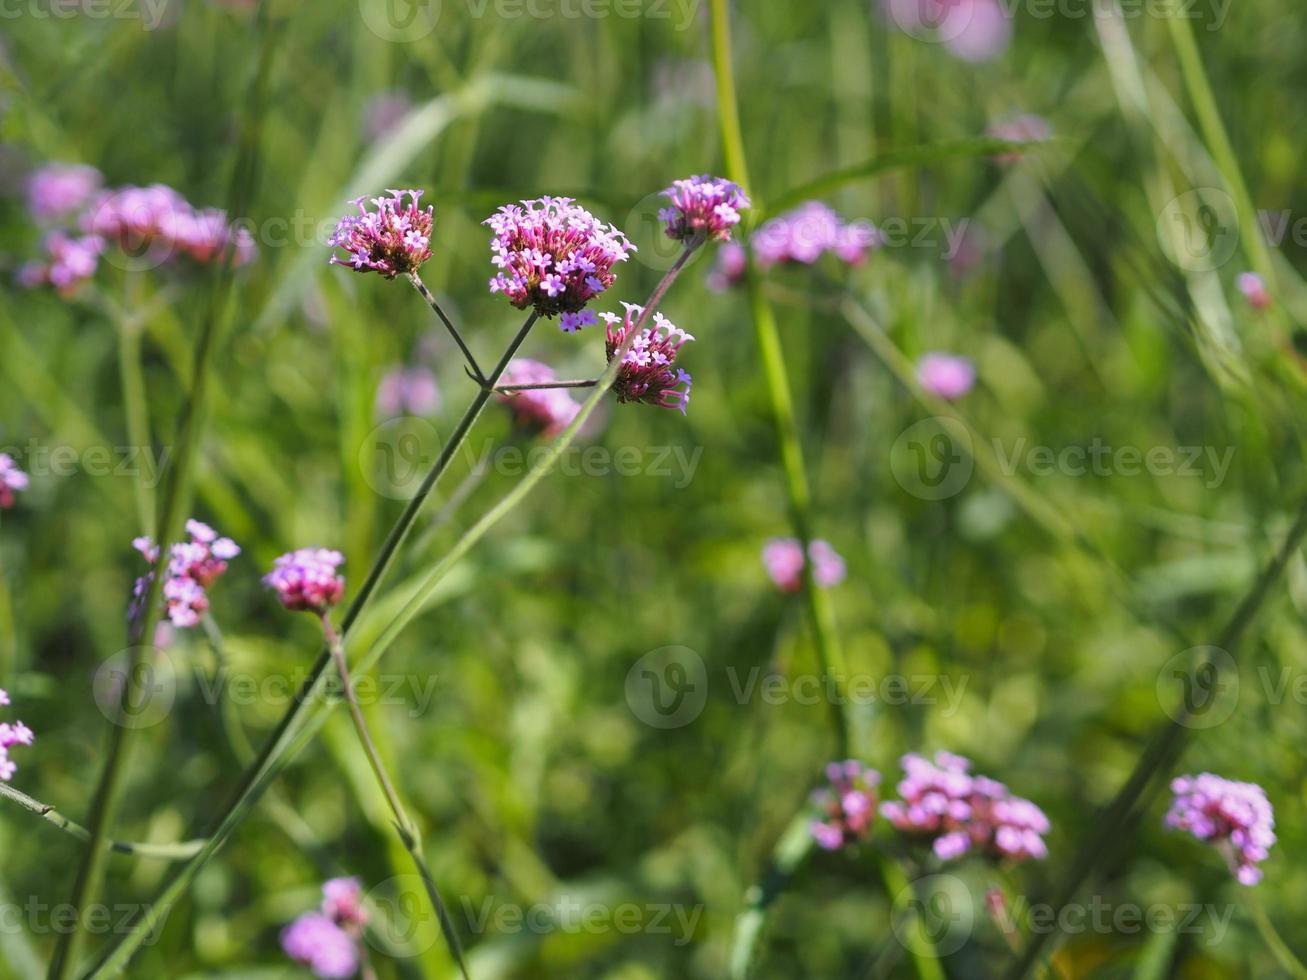 Verbena bouquet Small violet flower blooming in garden blurred of nature background, copy space concept for write text design in front background for banner, card, wallpaper, webpage photo